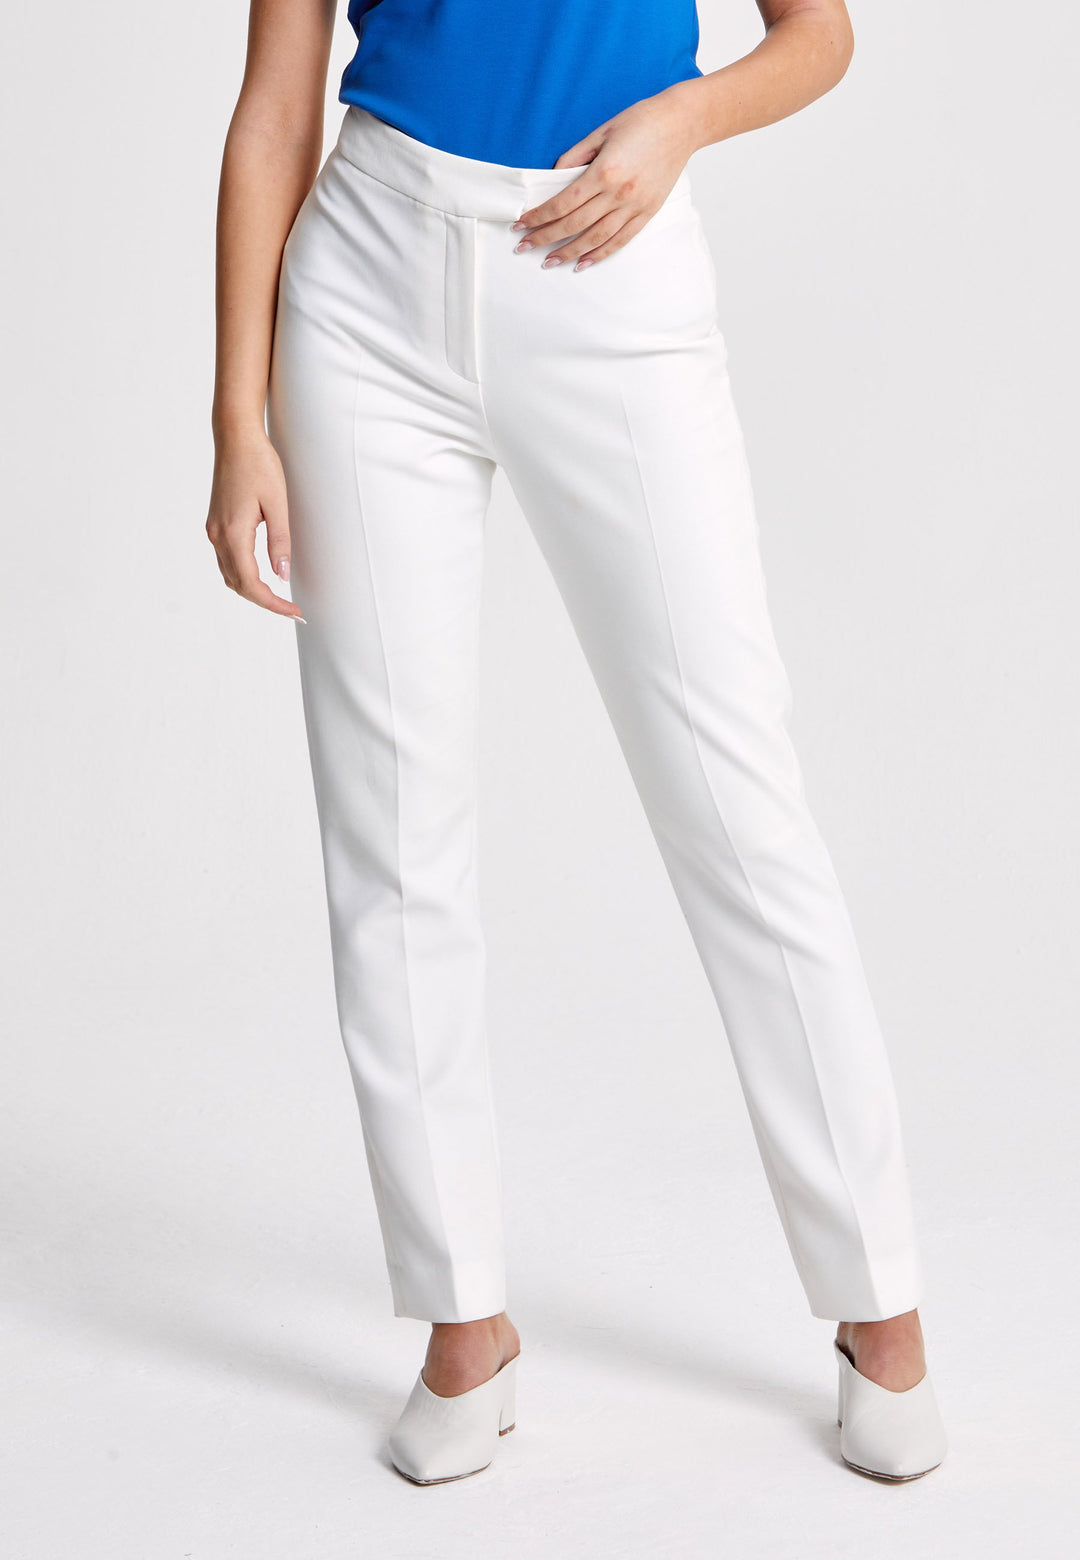 Investment-worthy, neat narrow-leg trouser with a hint of stretch. A wardrobe staple and HMcA classic. This fabric is made with a hint of elastane to ensure comfort and ease of movement. Shown here in a sophisticated optical white. Pair with a simple tee for workwear appeal or elevate your look with the coordinating blazer.